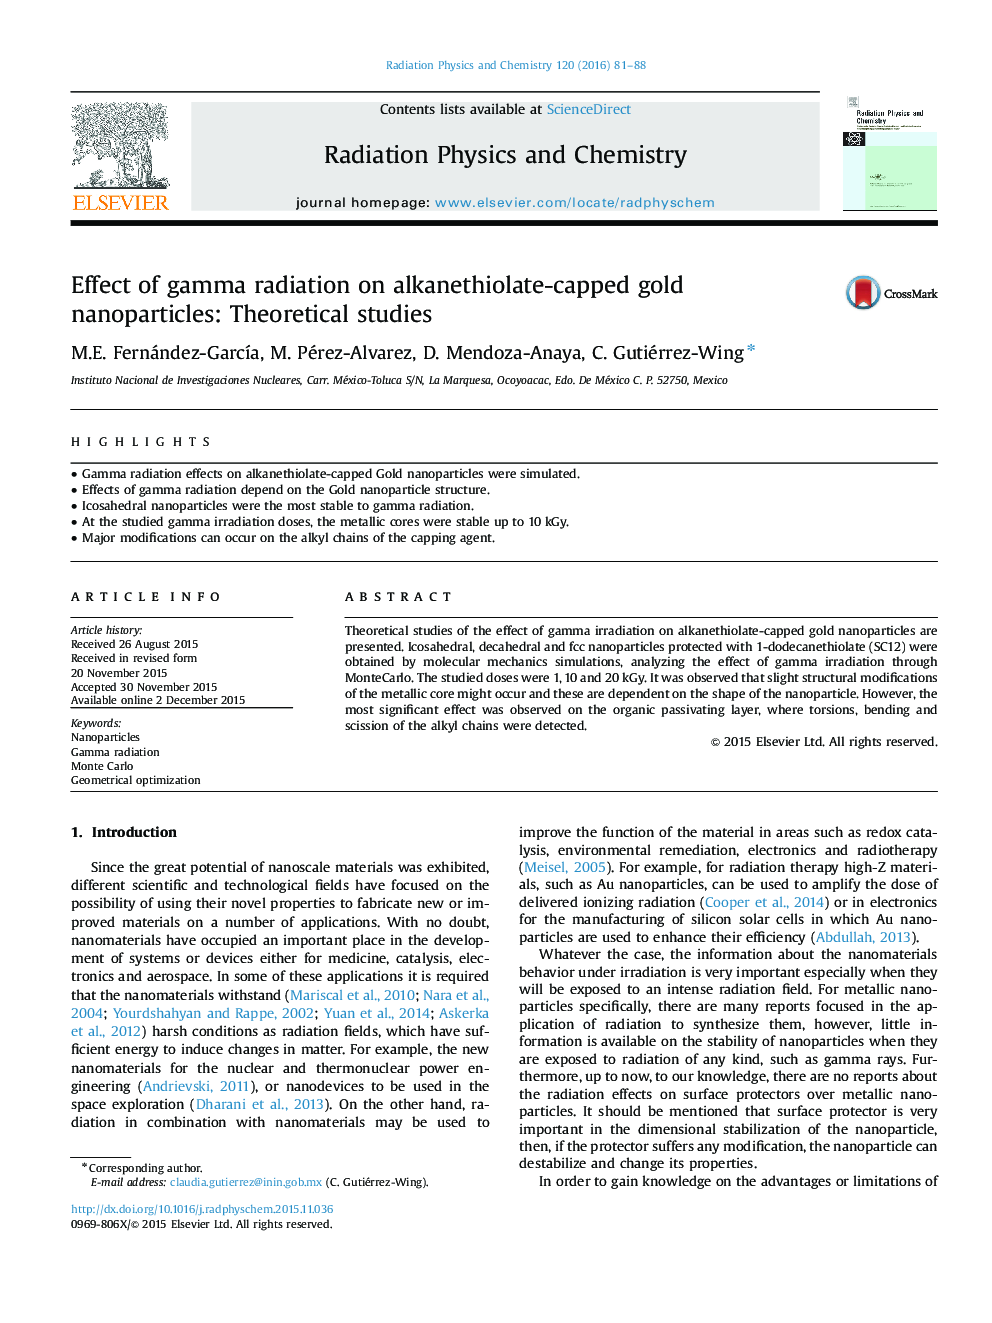 Effect of gamma radiation on alkanethiolate-capped gold nanoparticles: Theoretical studies